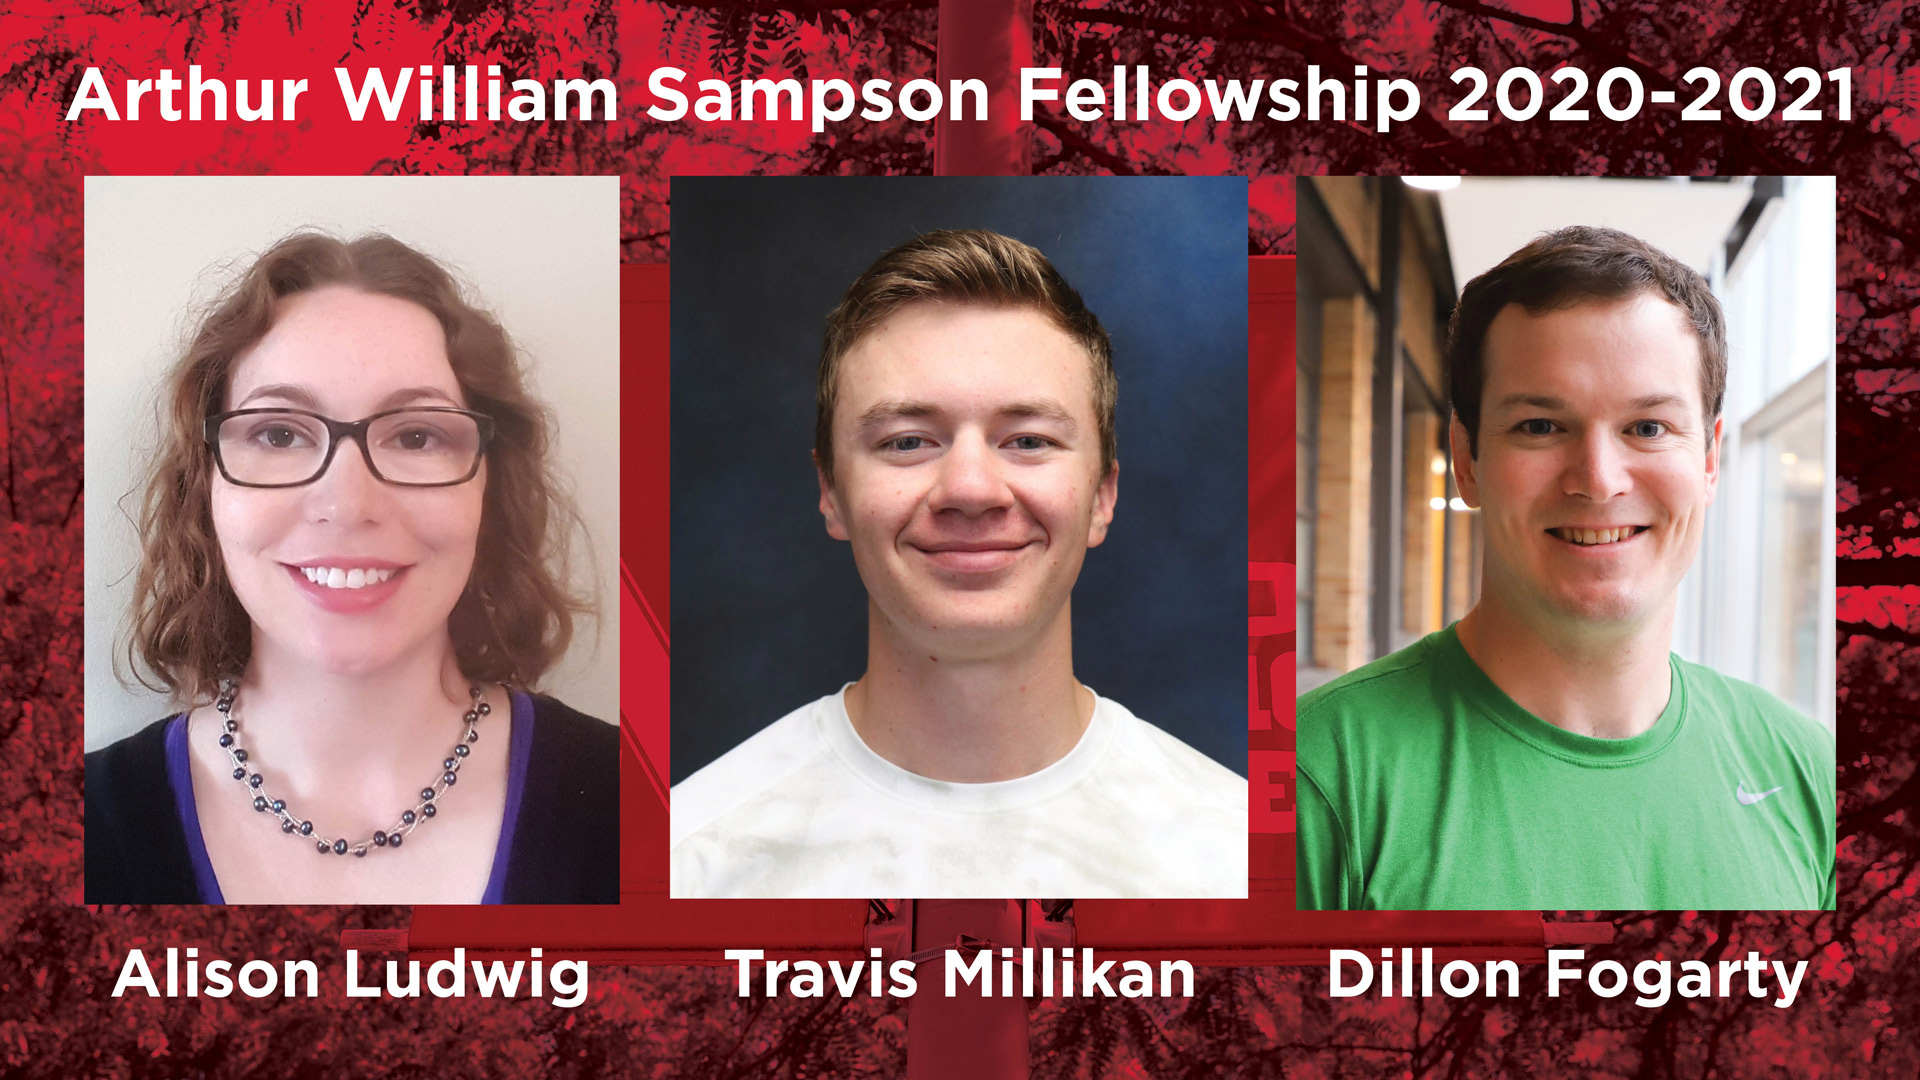 Graduate students Alison Ludwig, Travis Millikan and Dillon Fogarty were awarded the Arthur William Sampson Fellowship for 2020-2021.